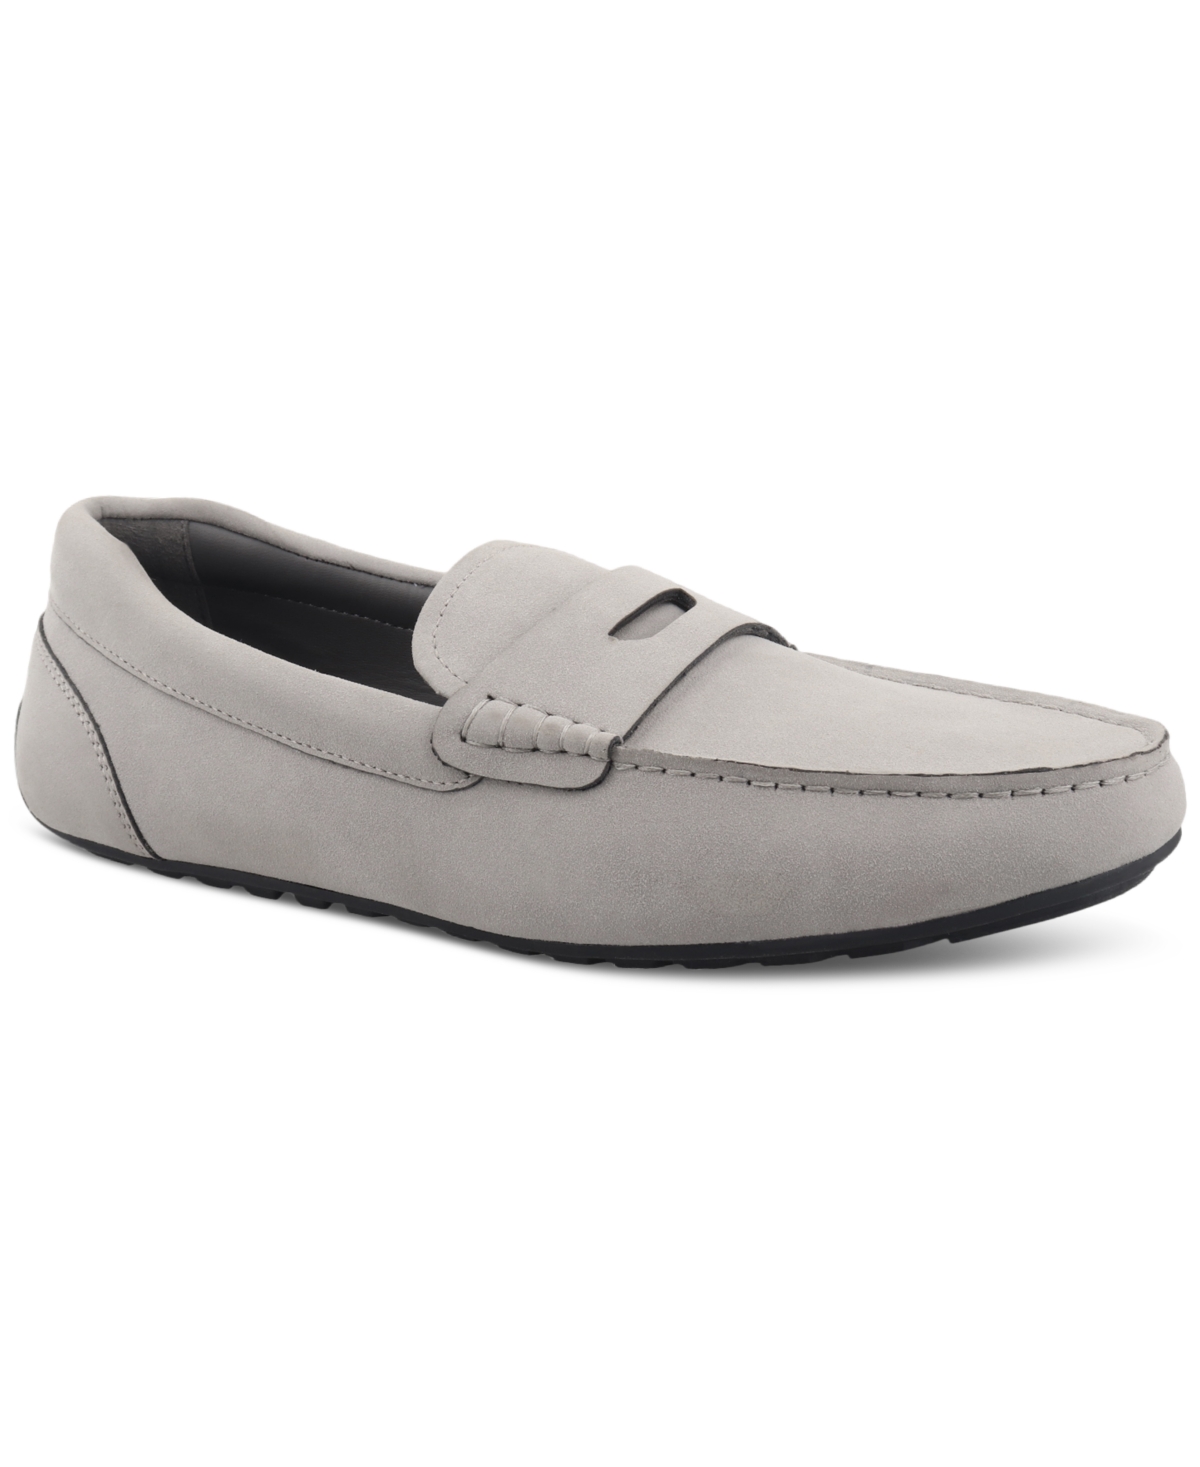 Men's Marco Slip-On Penny Drivers, Created for Macy's - Brown